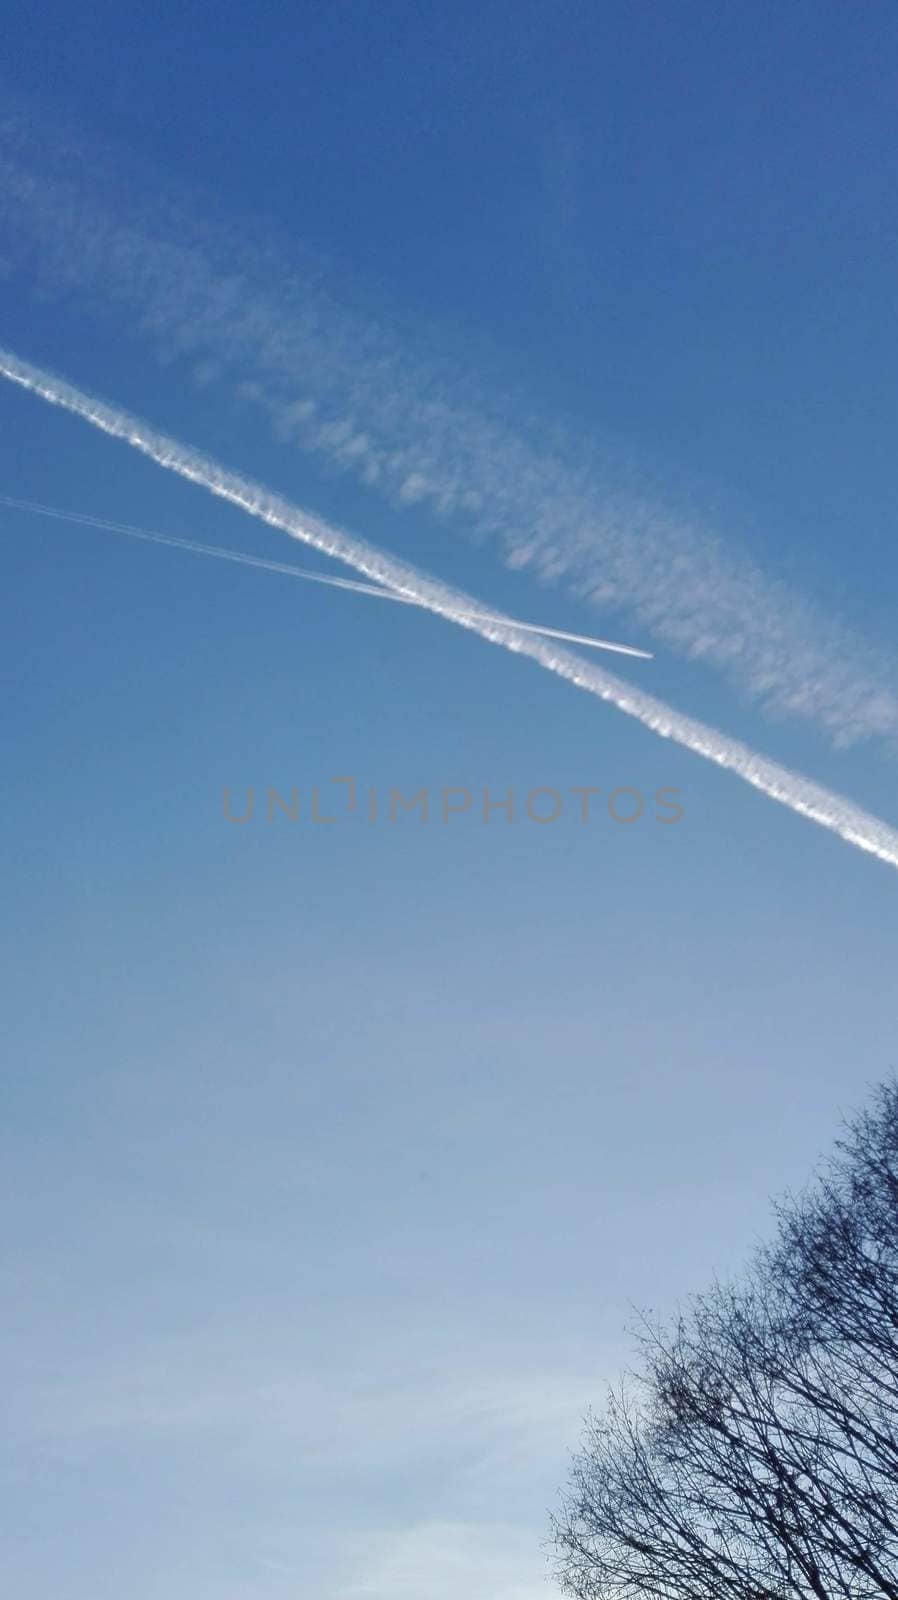 Condensate strips in Újszeged in the afternoon. High quality photo